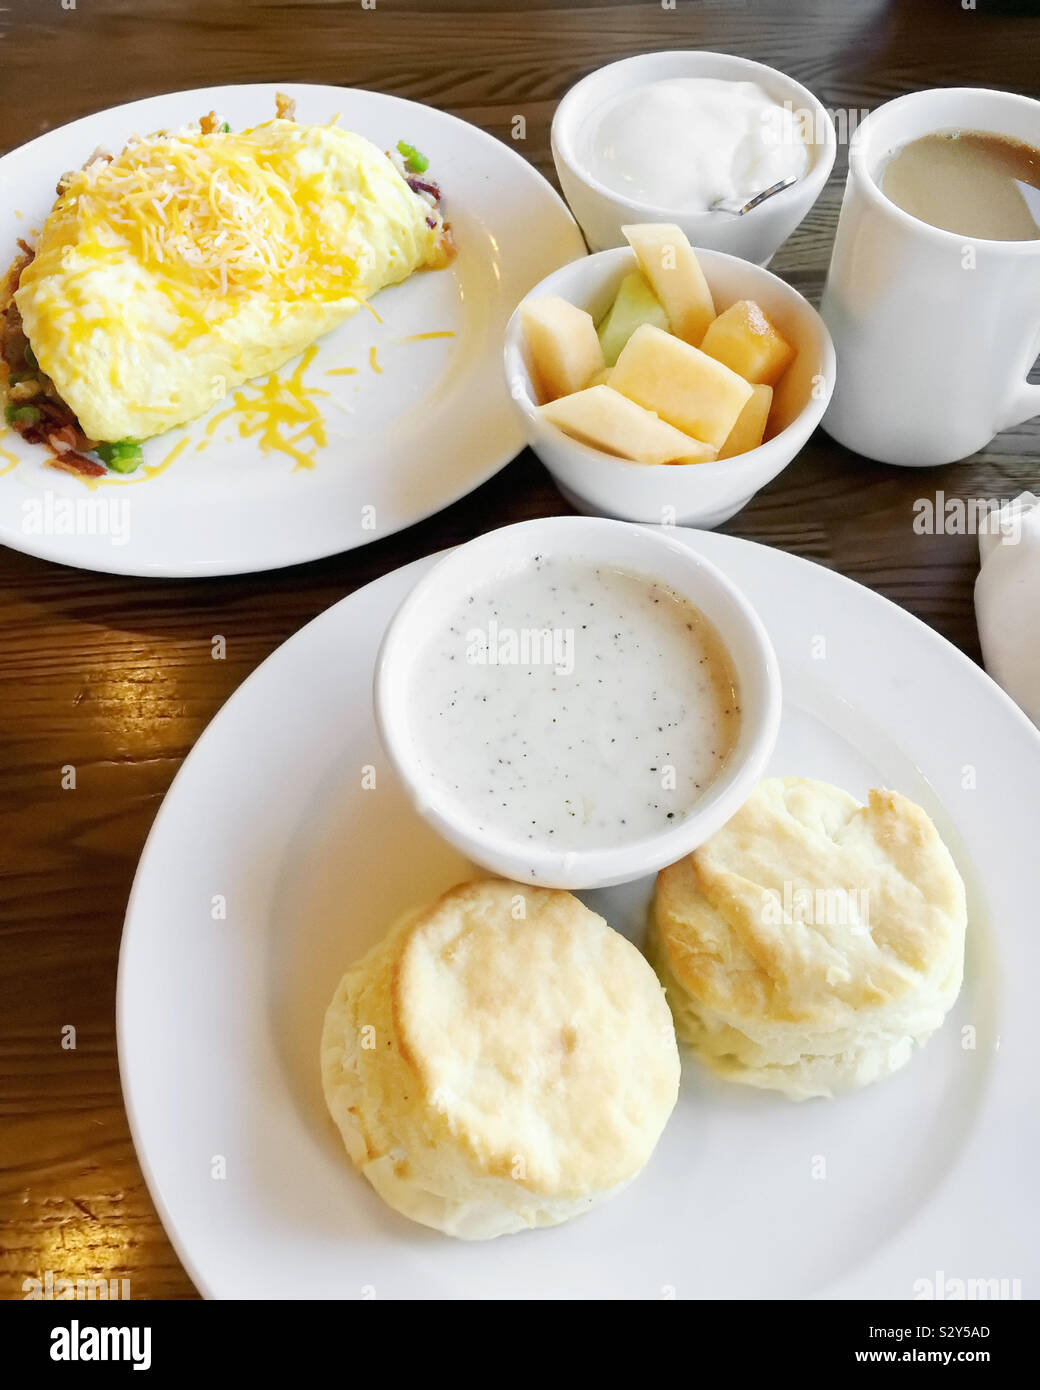 Homemade buttermilk biscuits served with gravy. There’s also an egg omelet and a bowl of fresh fruit. Coffee is the drink of choice. Stock Photo